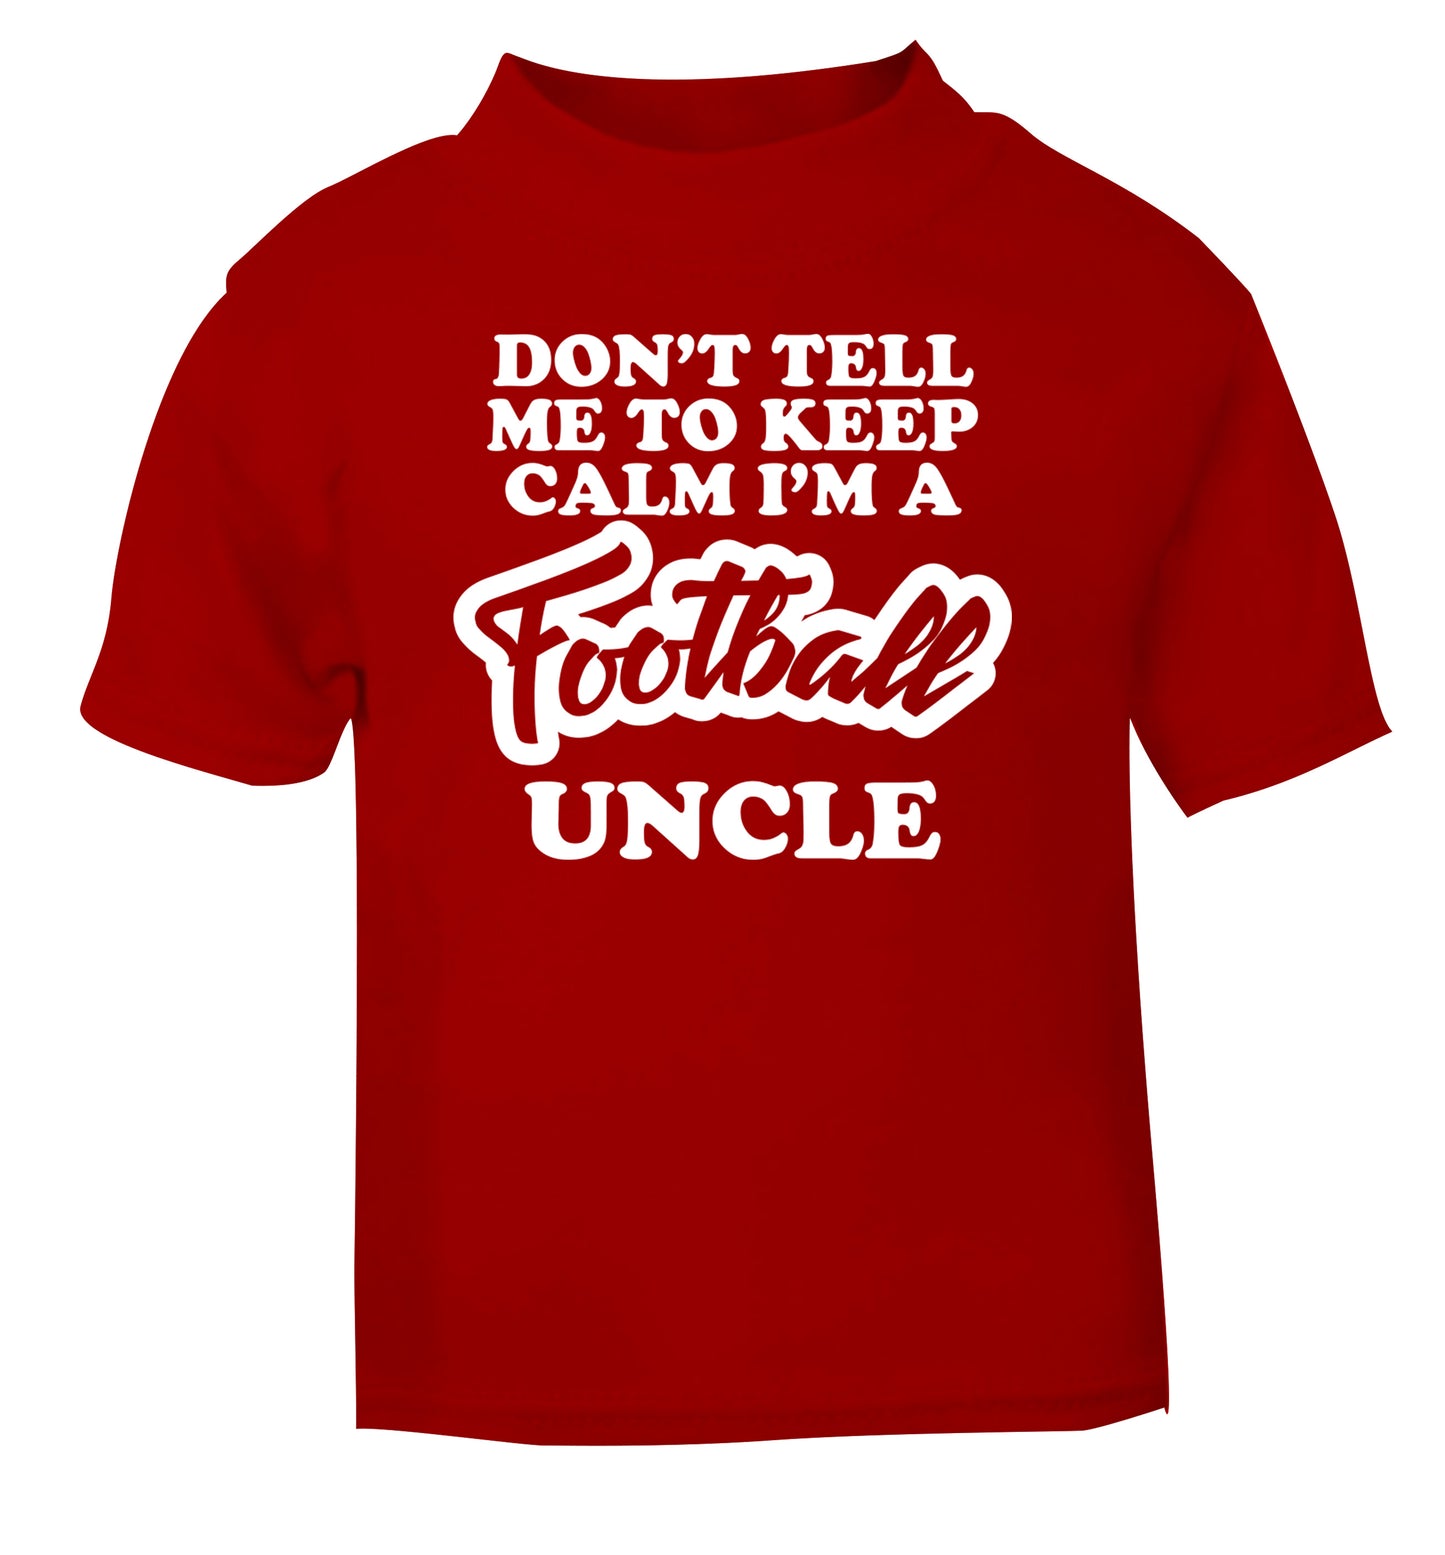 Don't tell me to keep calm I'm a football uncle red Baby Toddler Tshirt 2 Years